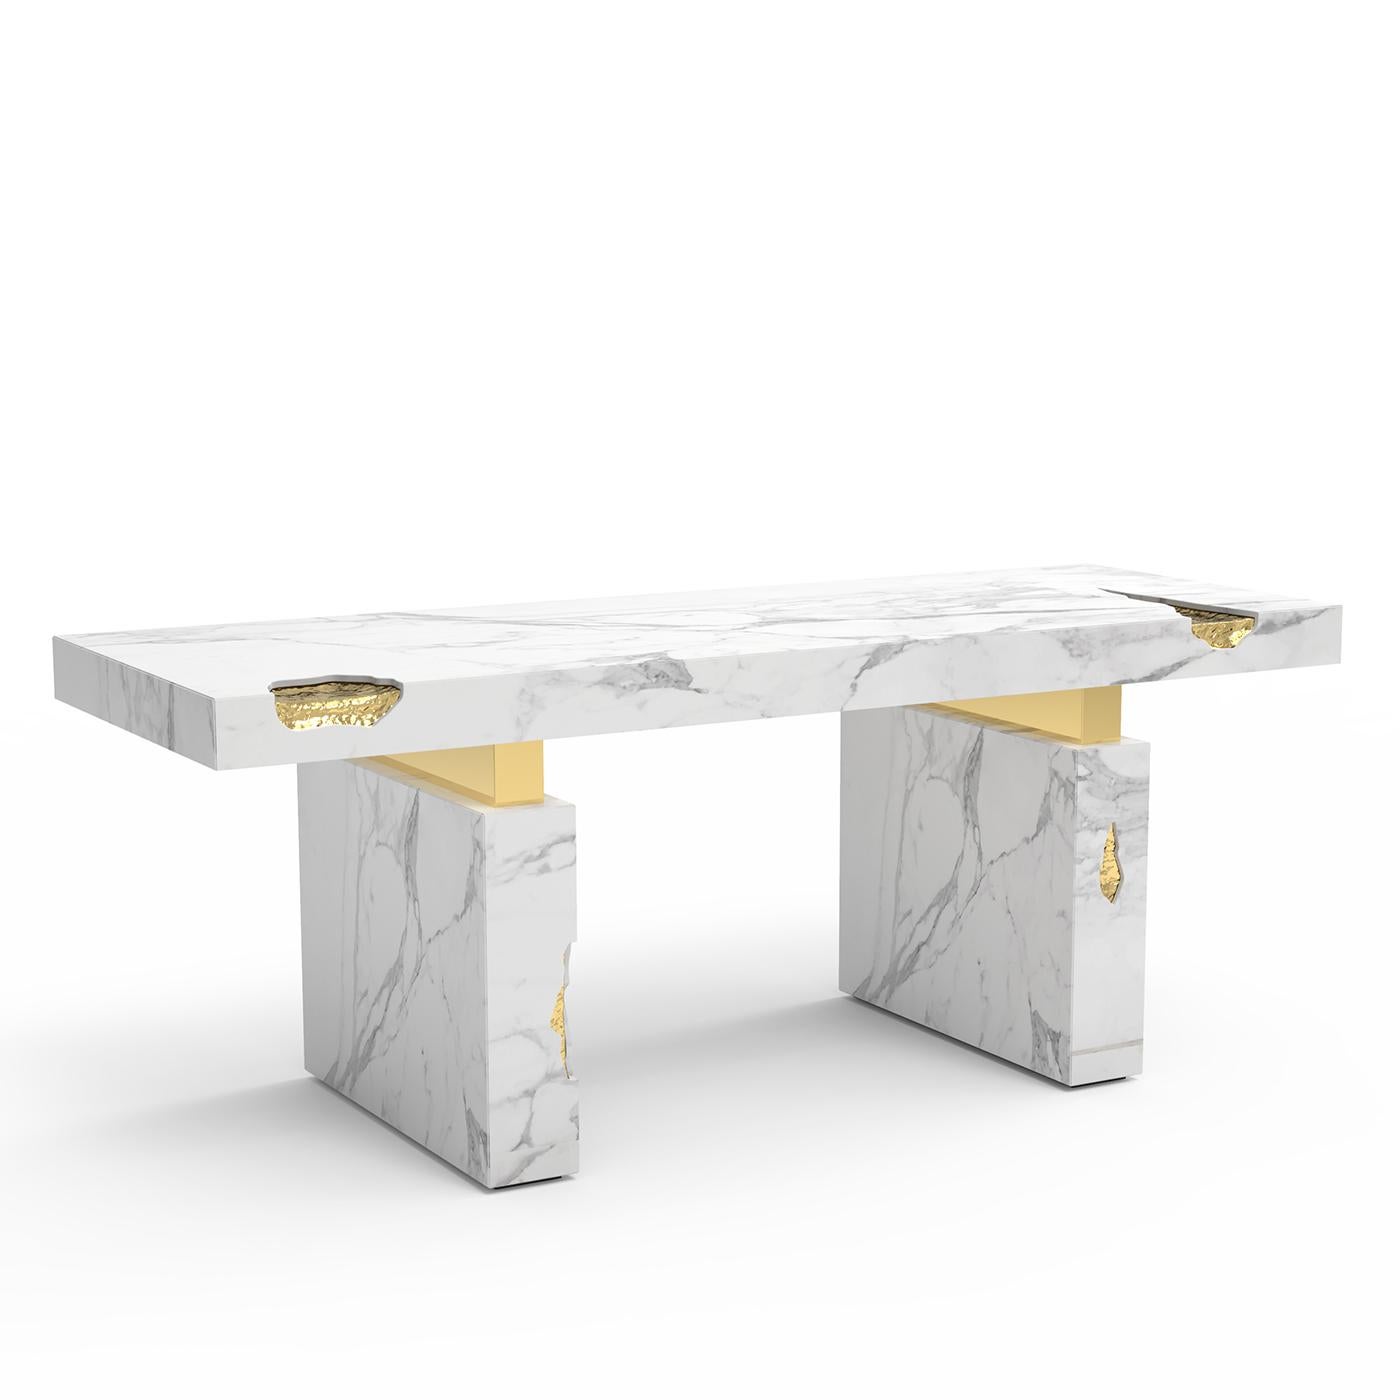 Desk majestic white with 2 bases and top in solid
polished Estremoz white marble with solid brass 
details in gold finish.